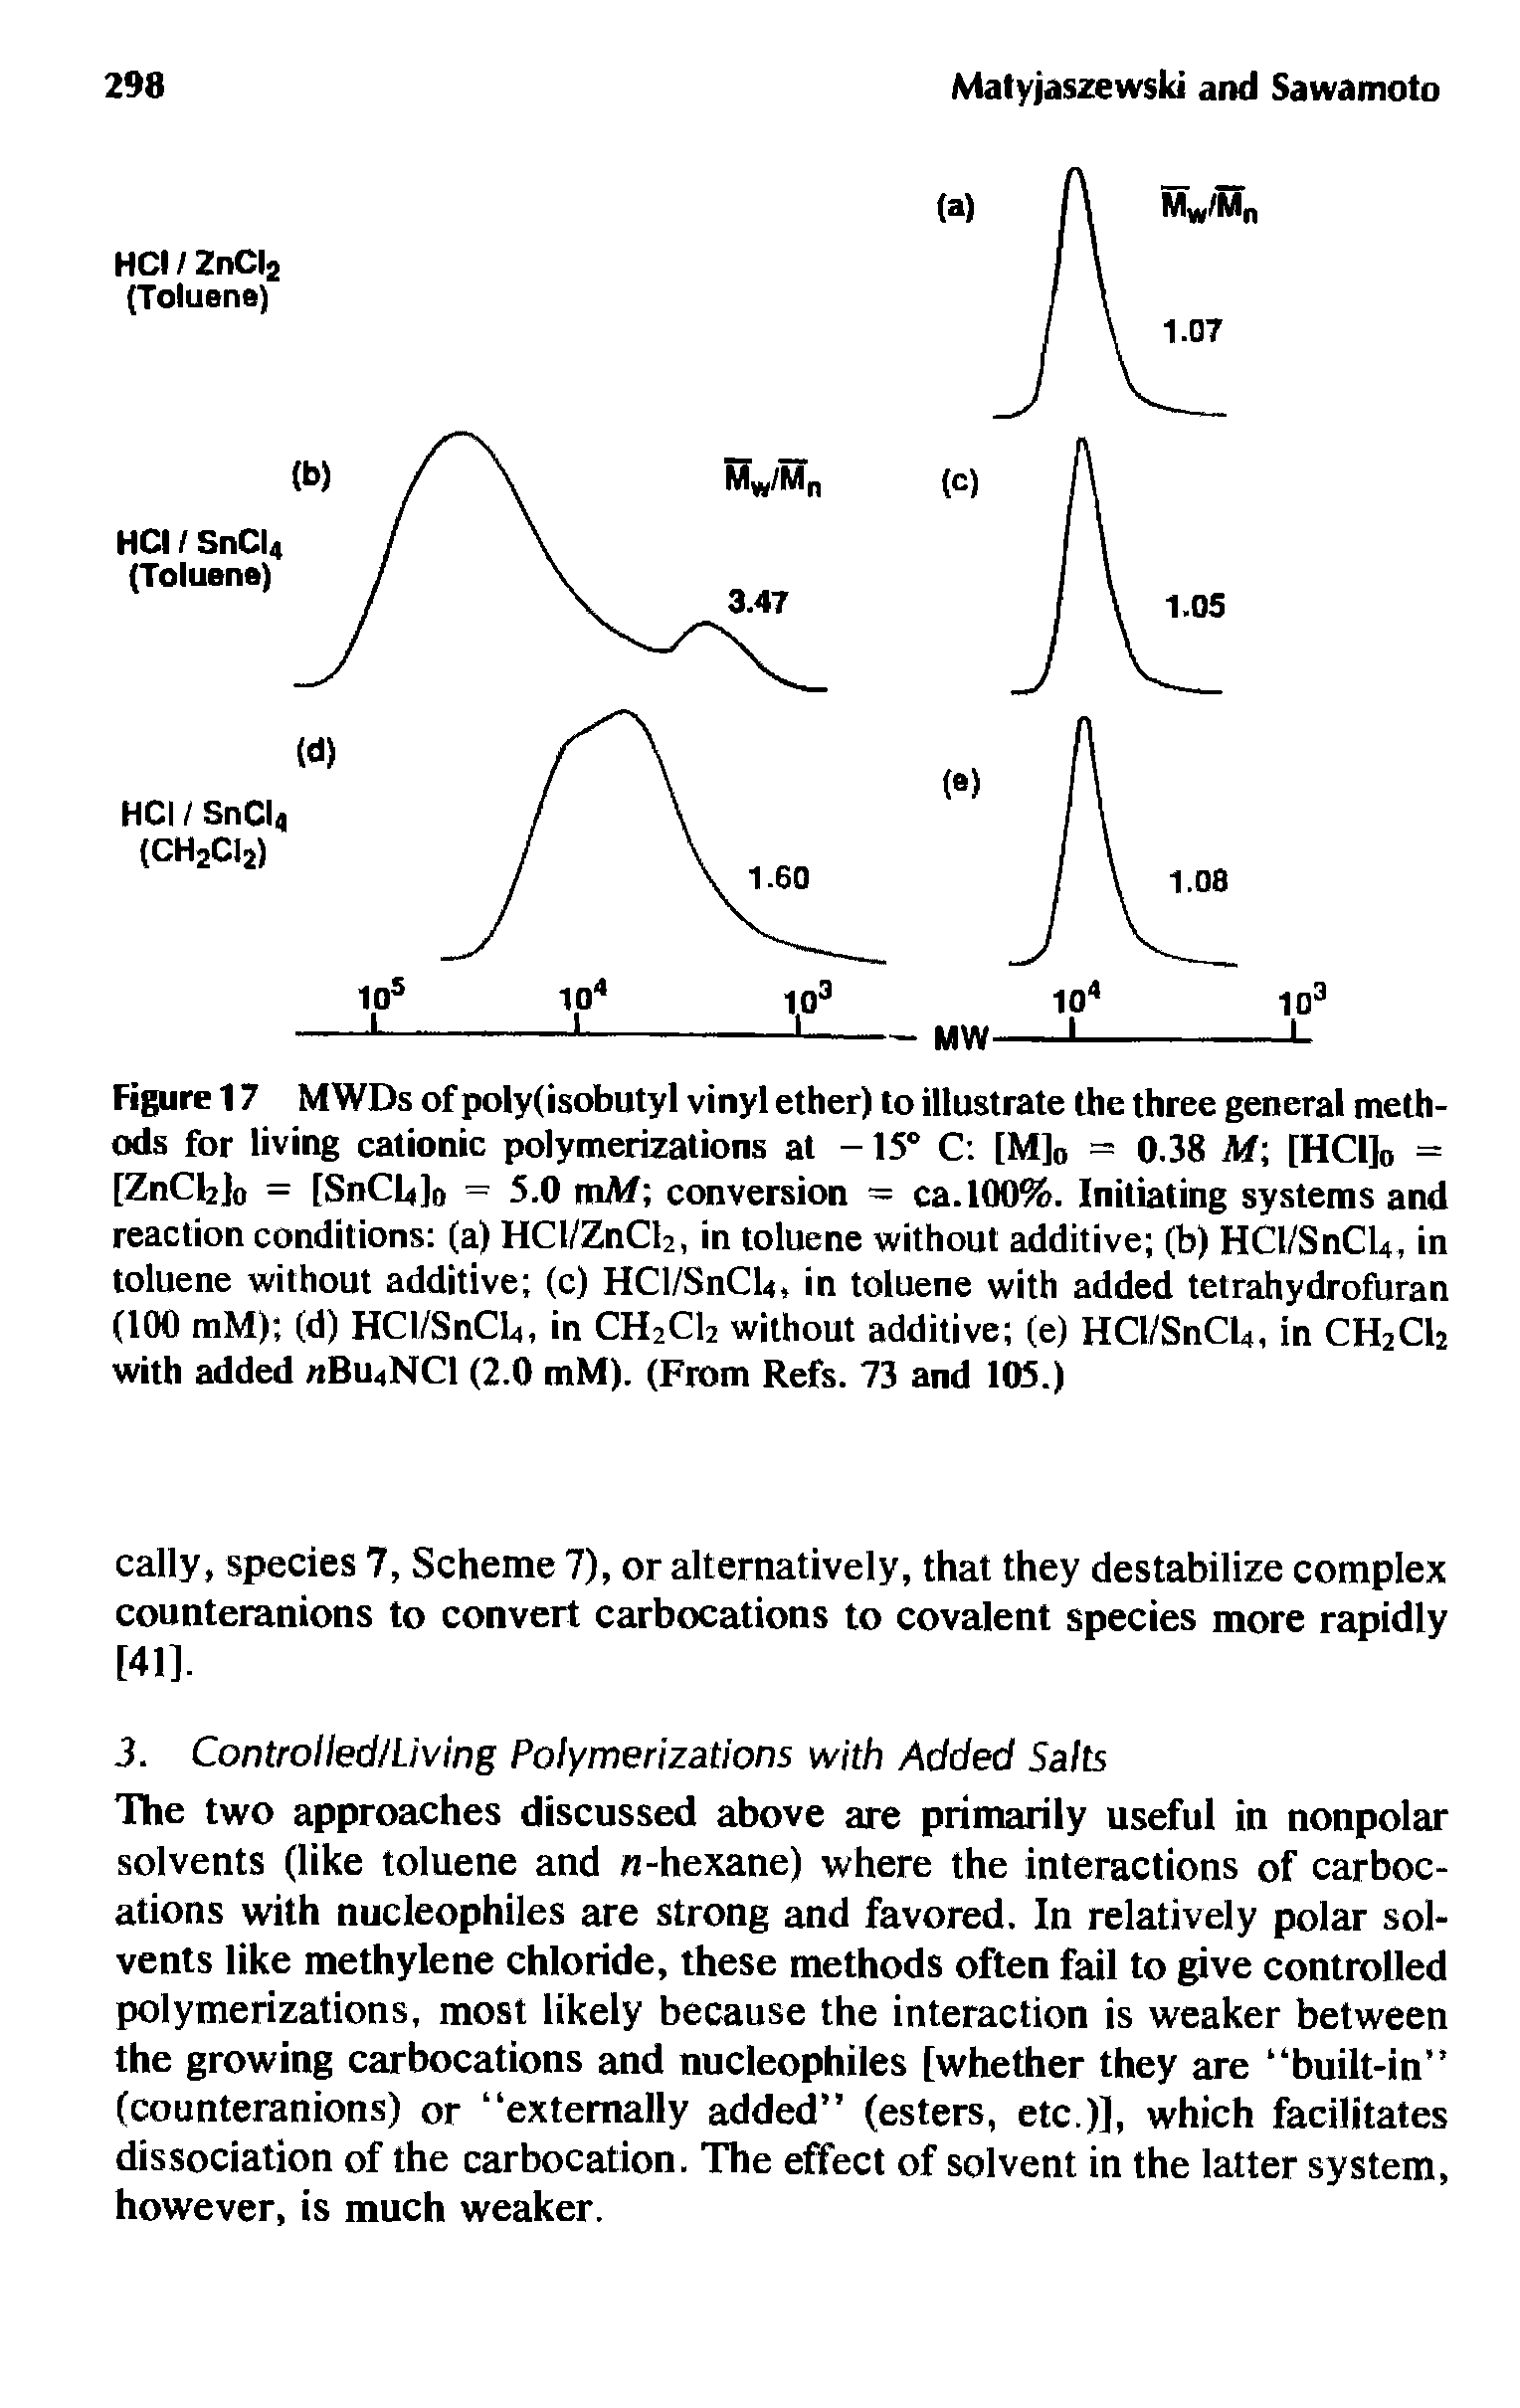 Figure 17 MWDs of poly(isobutyl vinyl ether) to illustrate the three general methods for living cationic polymerizations at -15° C [M]0 = 0.38 Af [HCI]0 = [ZnCl2]0 = rSnCL(]0 = 5.0 mA/ conversion = ca.100%. Initiating systems and reaction conditions (a) HCl/ZnCl2, in toluene without additive (b) HCl/SnCU, in toluene without additive (c) HCl/SnCLt, in toluene with added tetrahydrofuran (100 mM) (d) HCl/SnCU, in CH2C12 without additive (e) HCl/SnCU, in CH2C12 with added Bu4NCl (2.0 mM). (From Refs. 73 and 105.)...